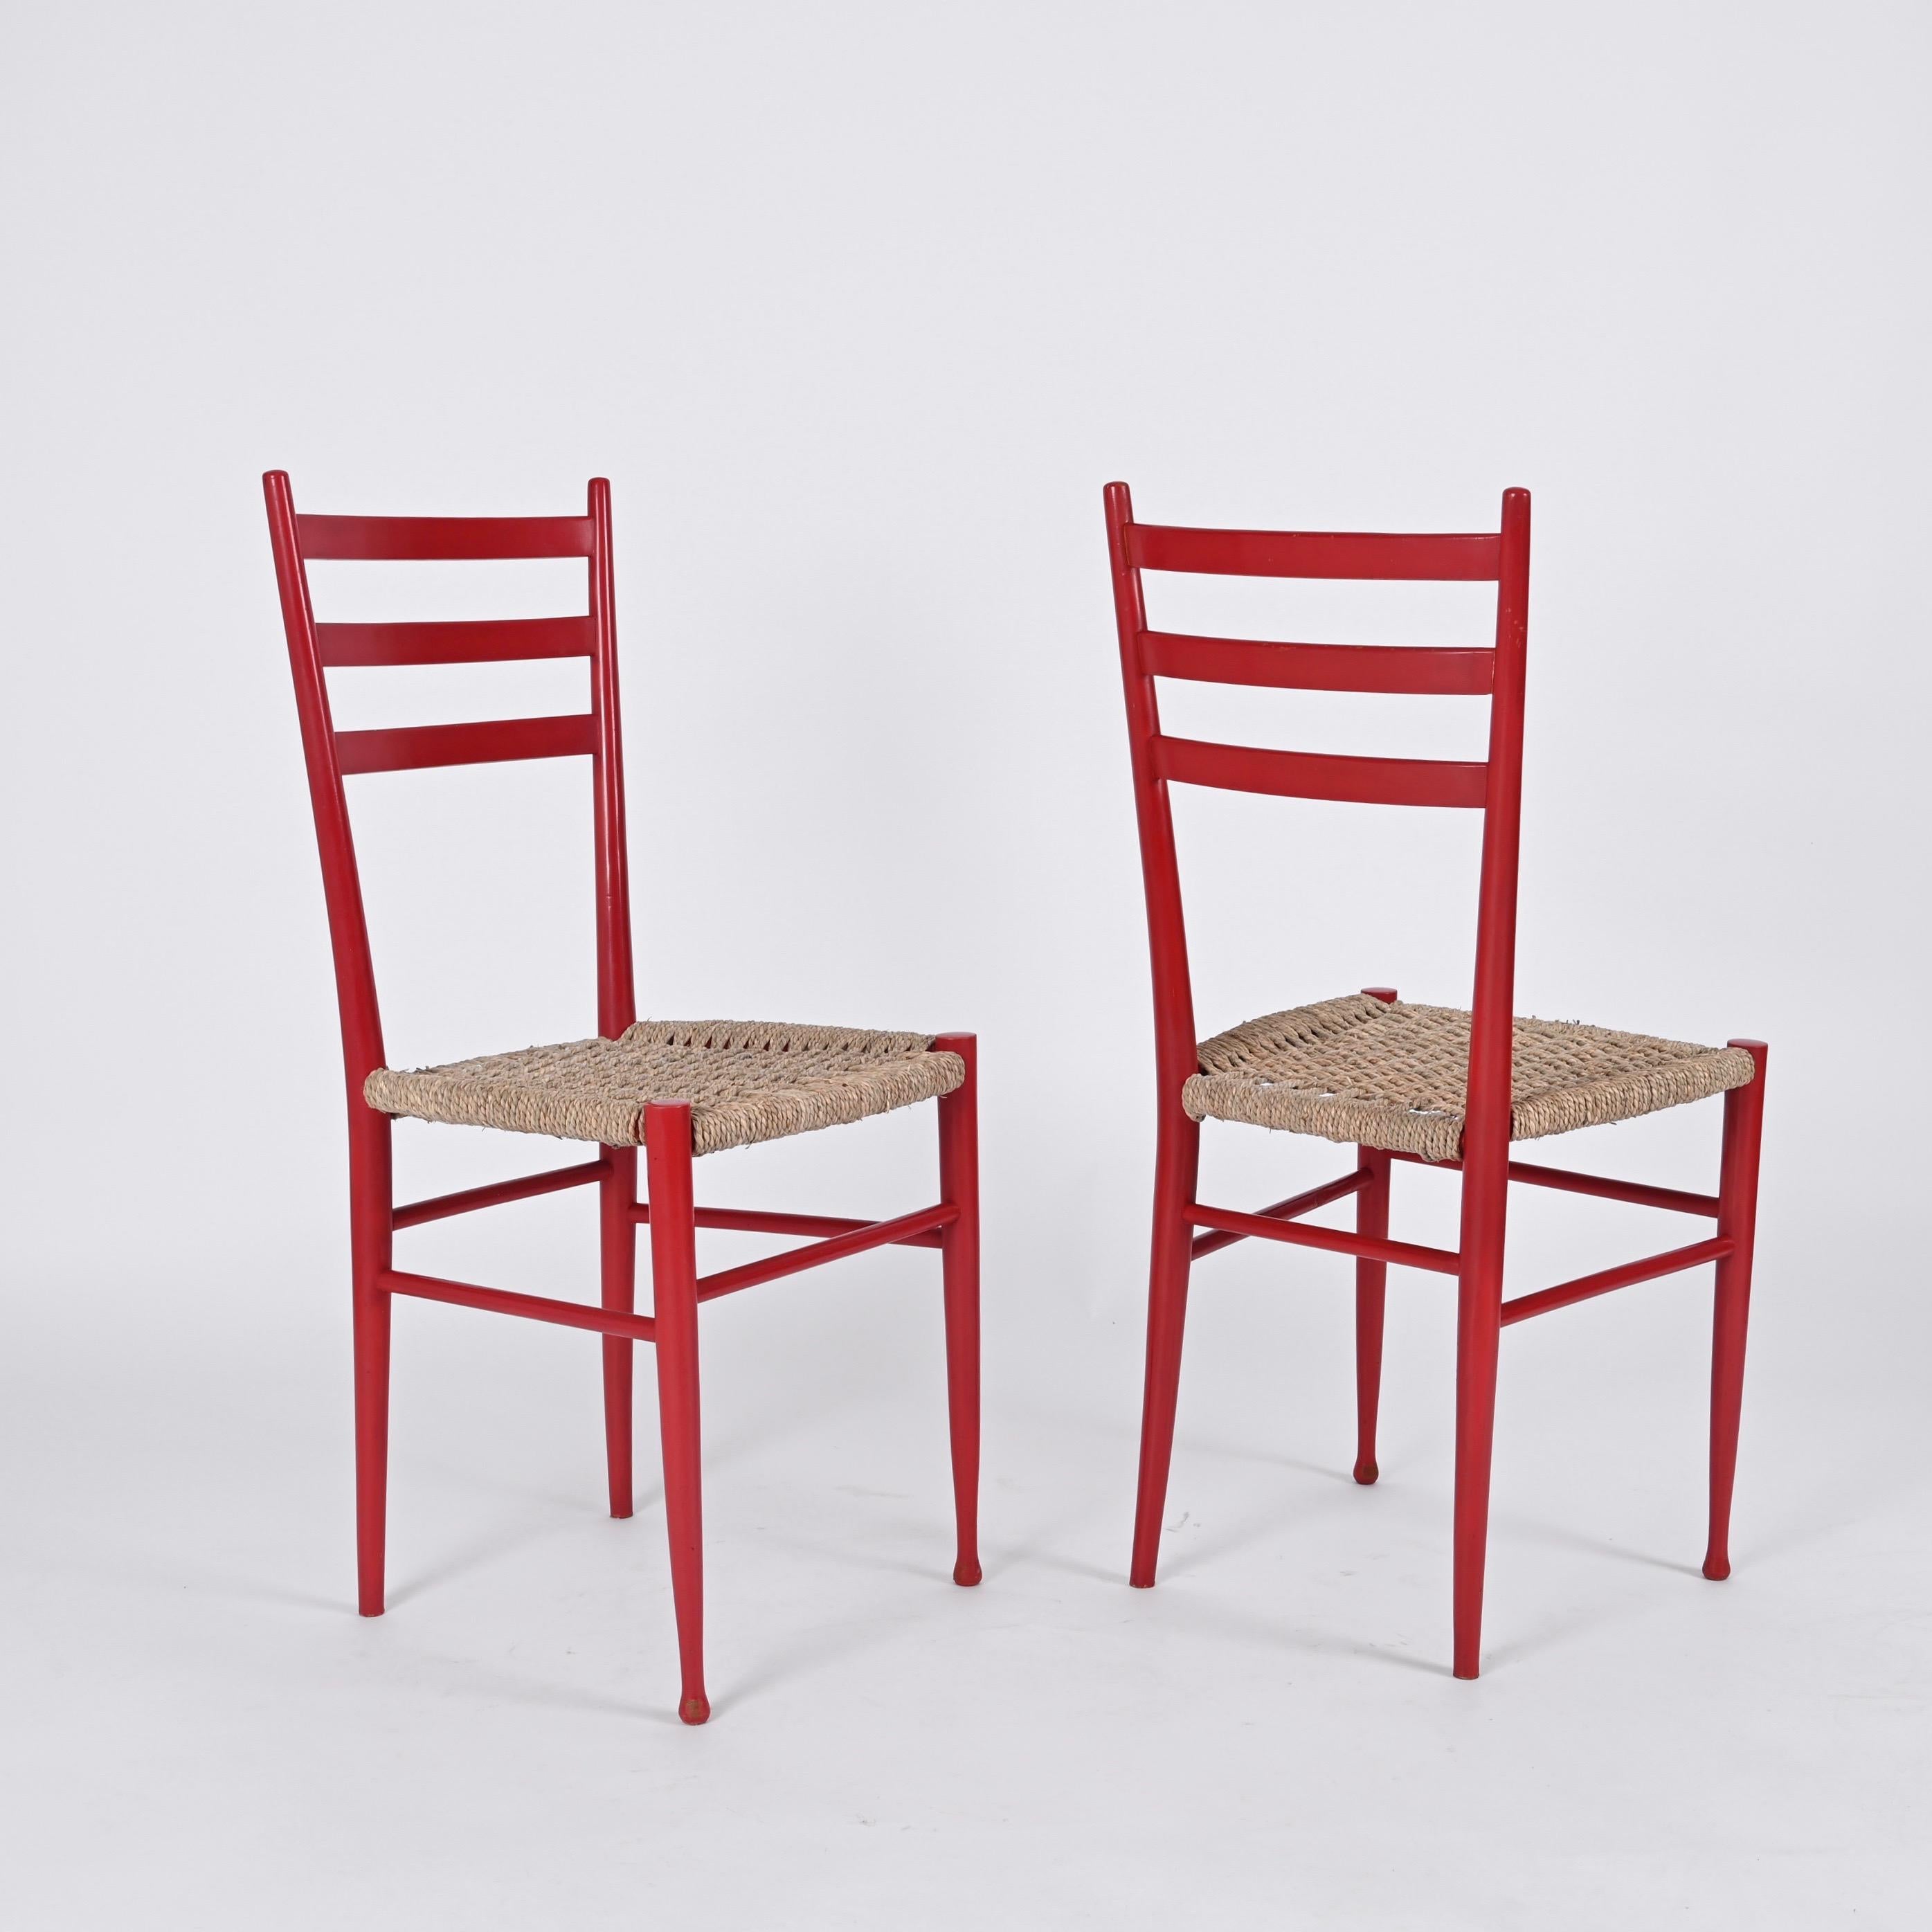 Set of 4 Chiavarine Chairs in Red Stained Beech and Bamboo Rope, Italy 1950s For Sale 1